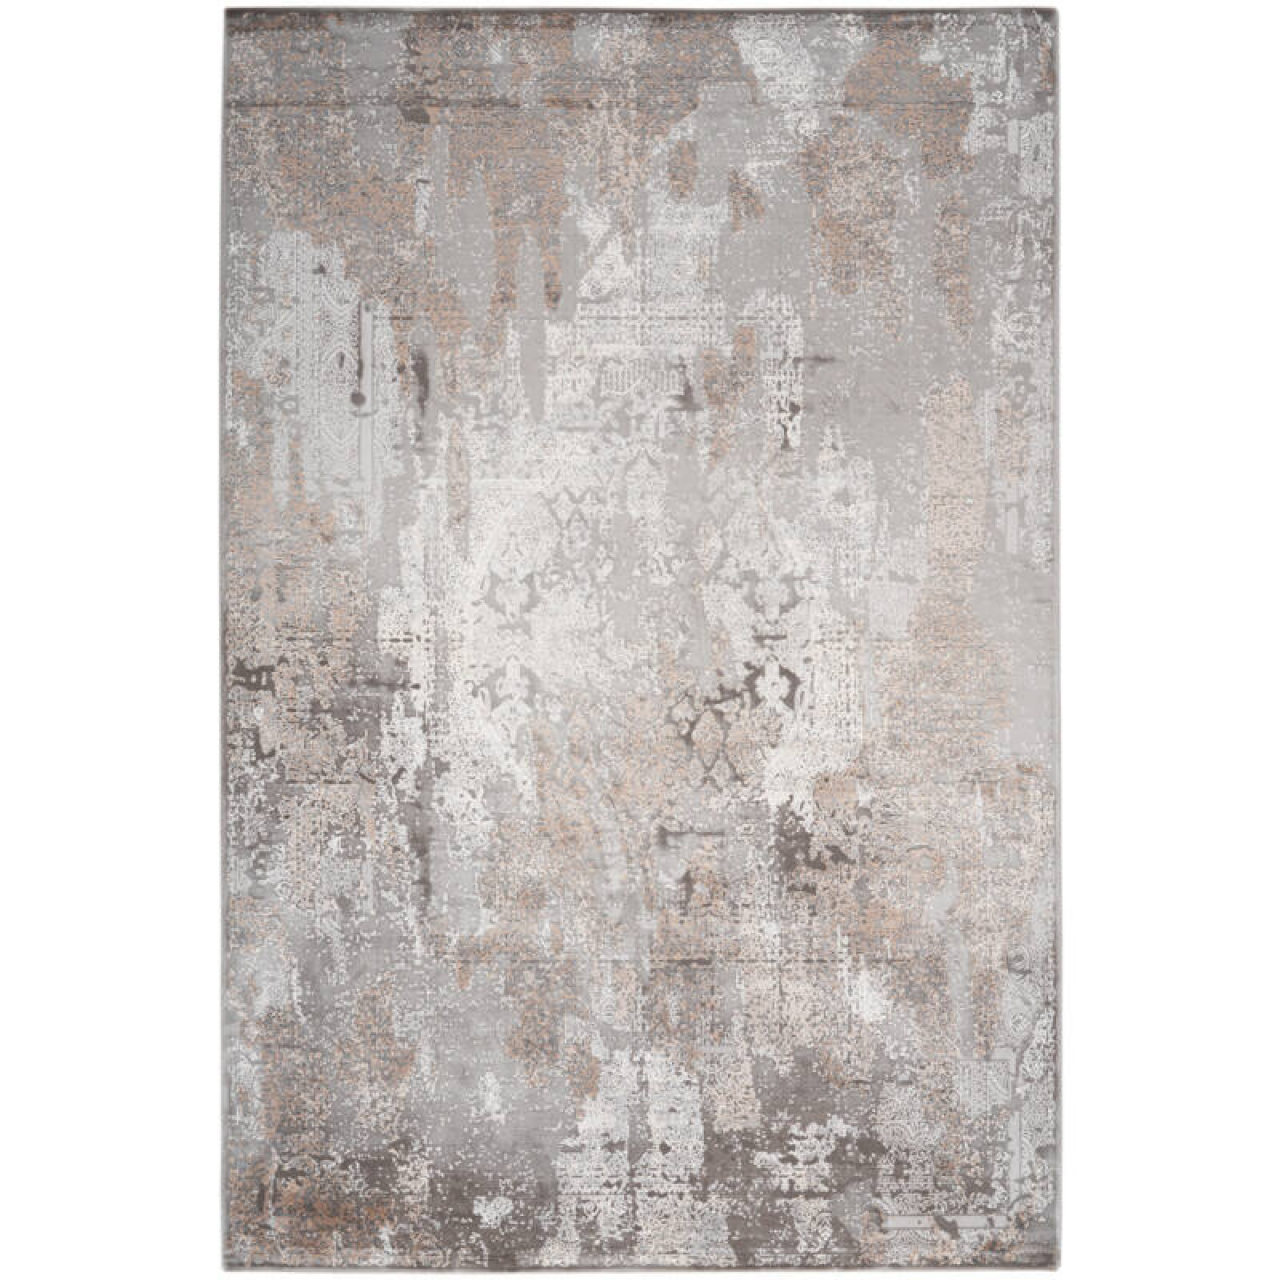 Obsession Haute Couture Jewel 951 Taupe szőnyeg-240x340